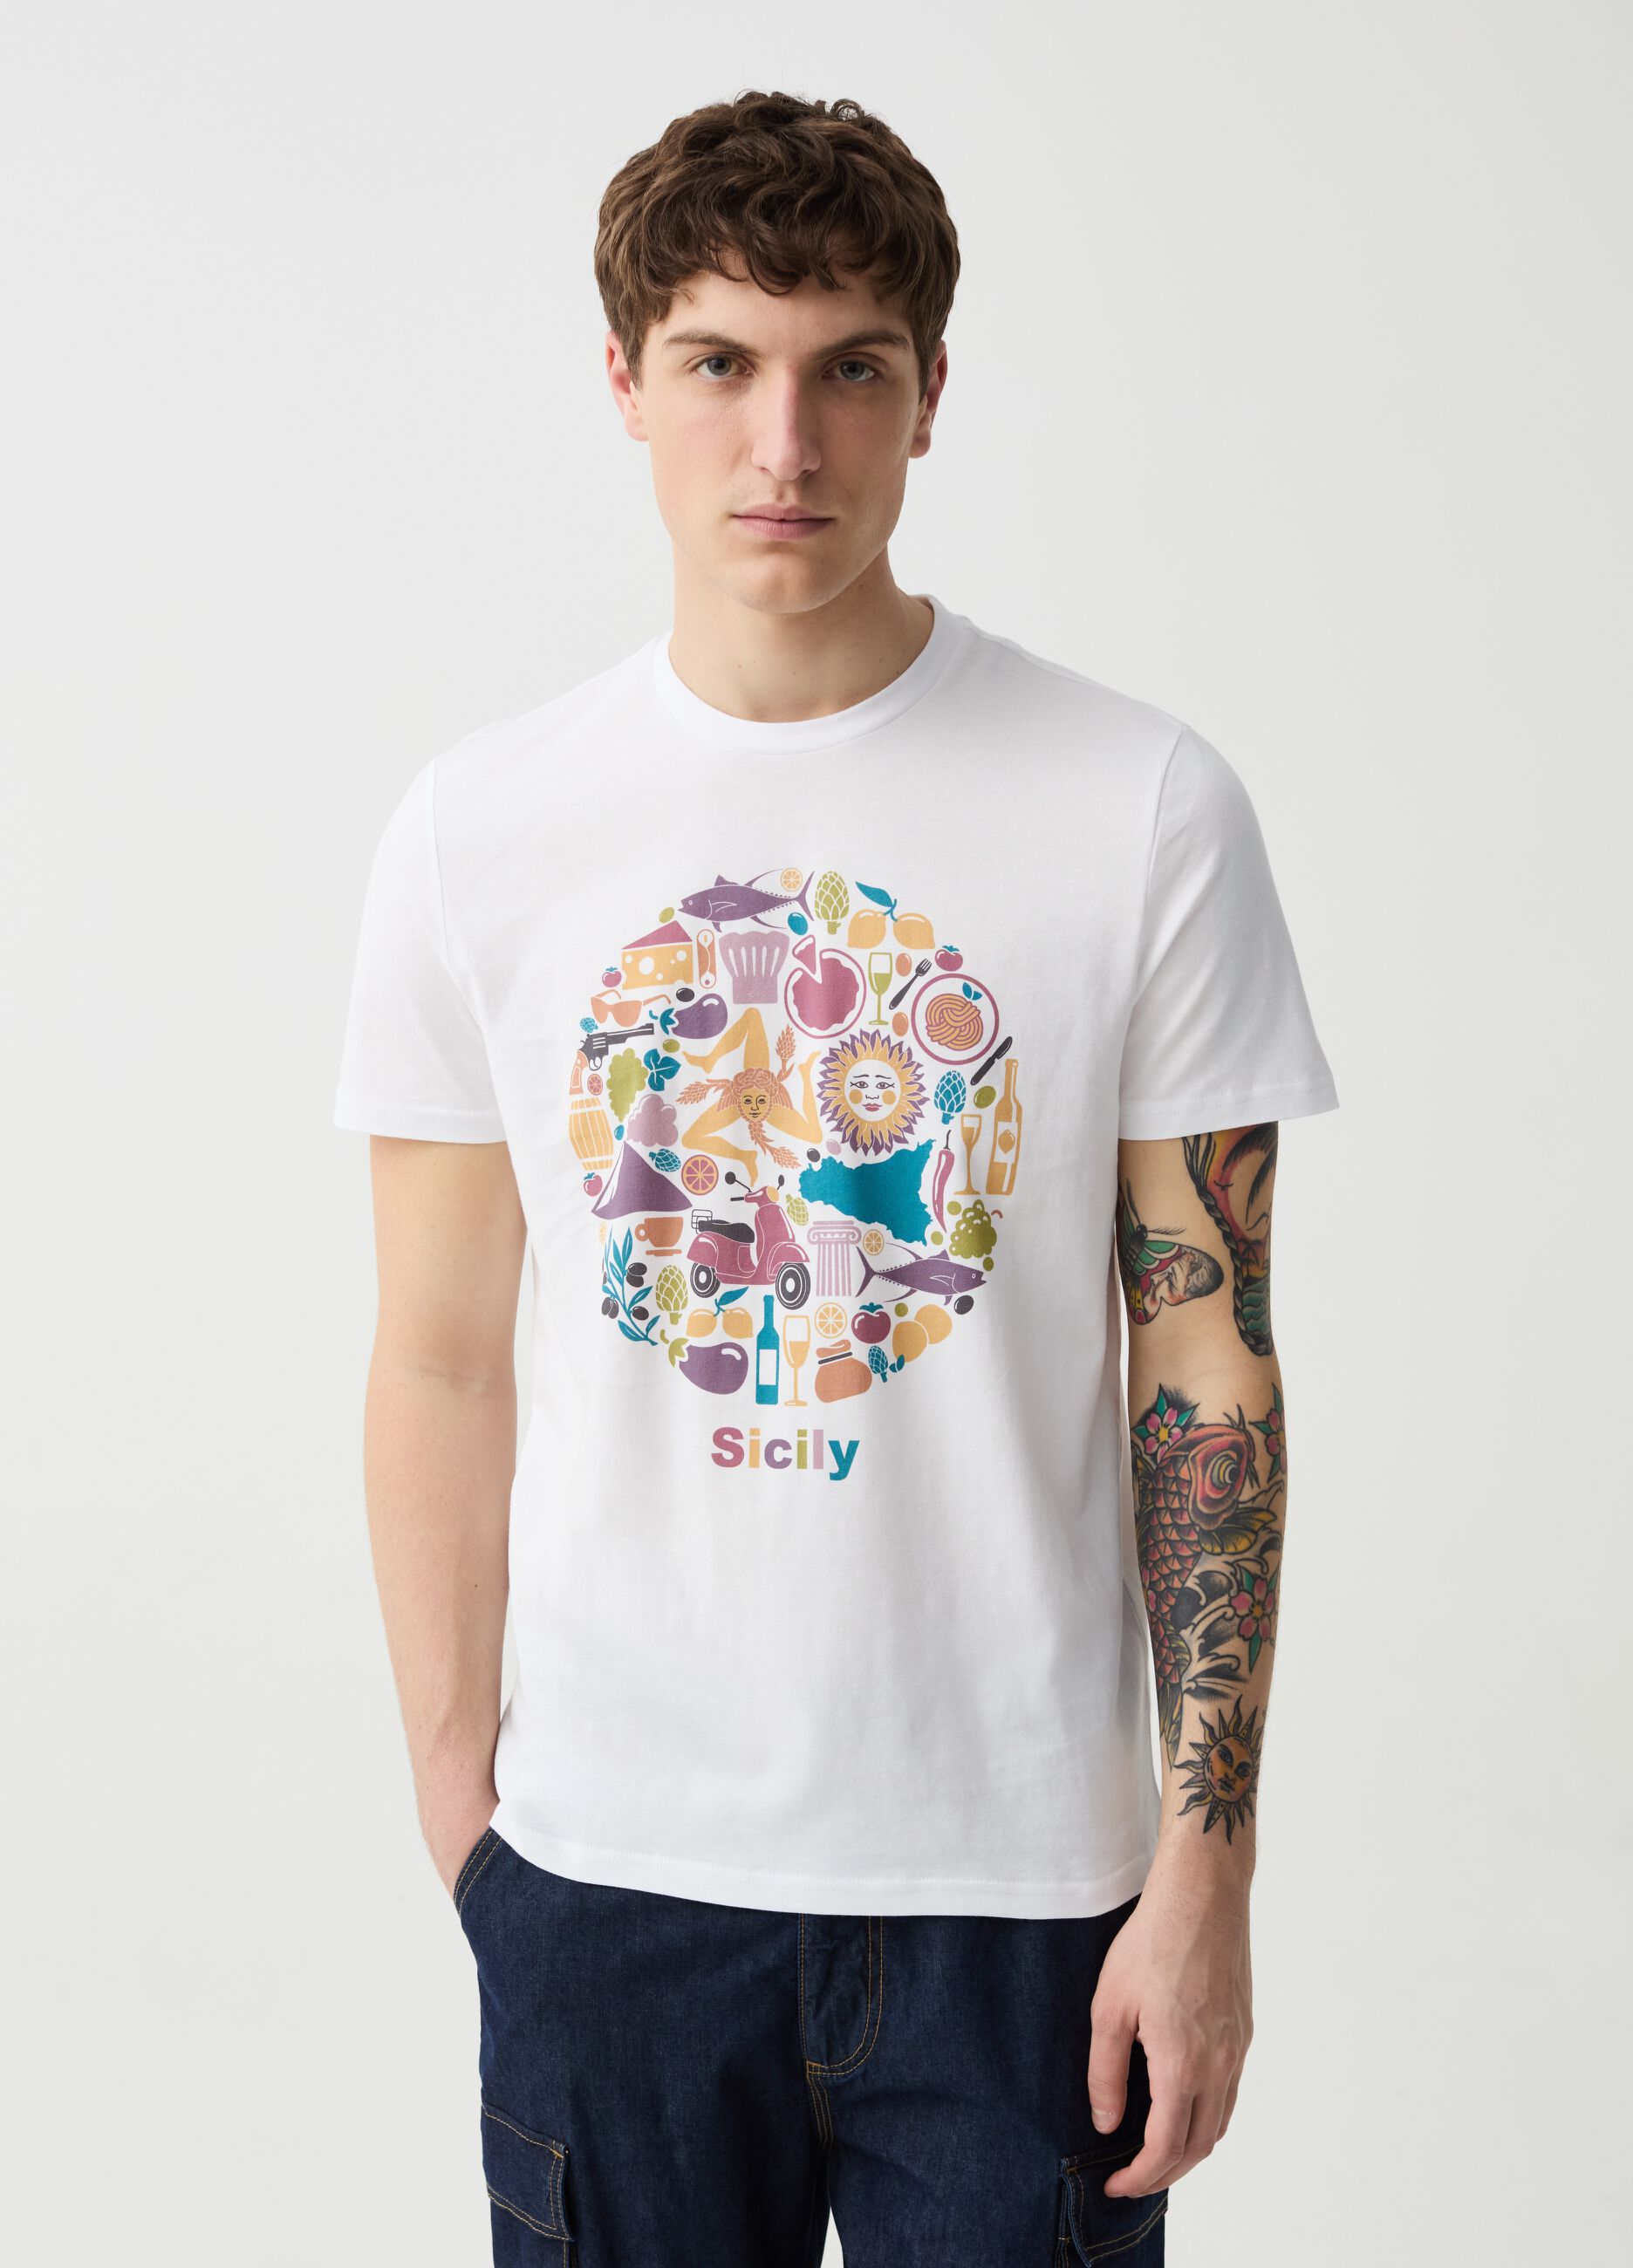 Cotton T-shirt with Sicily print